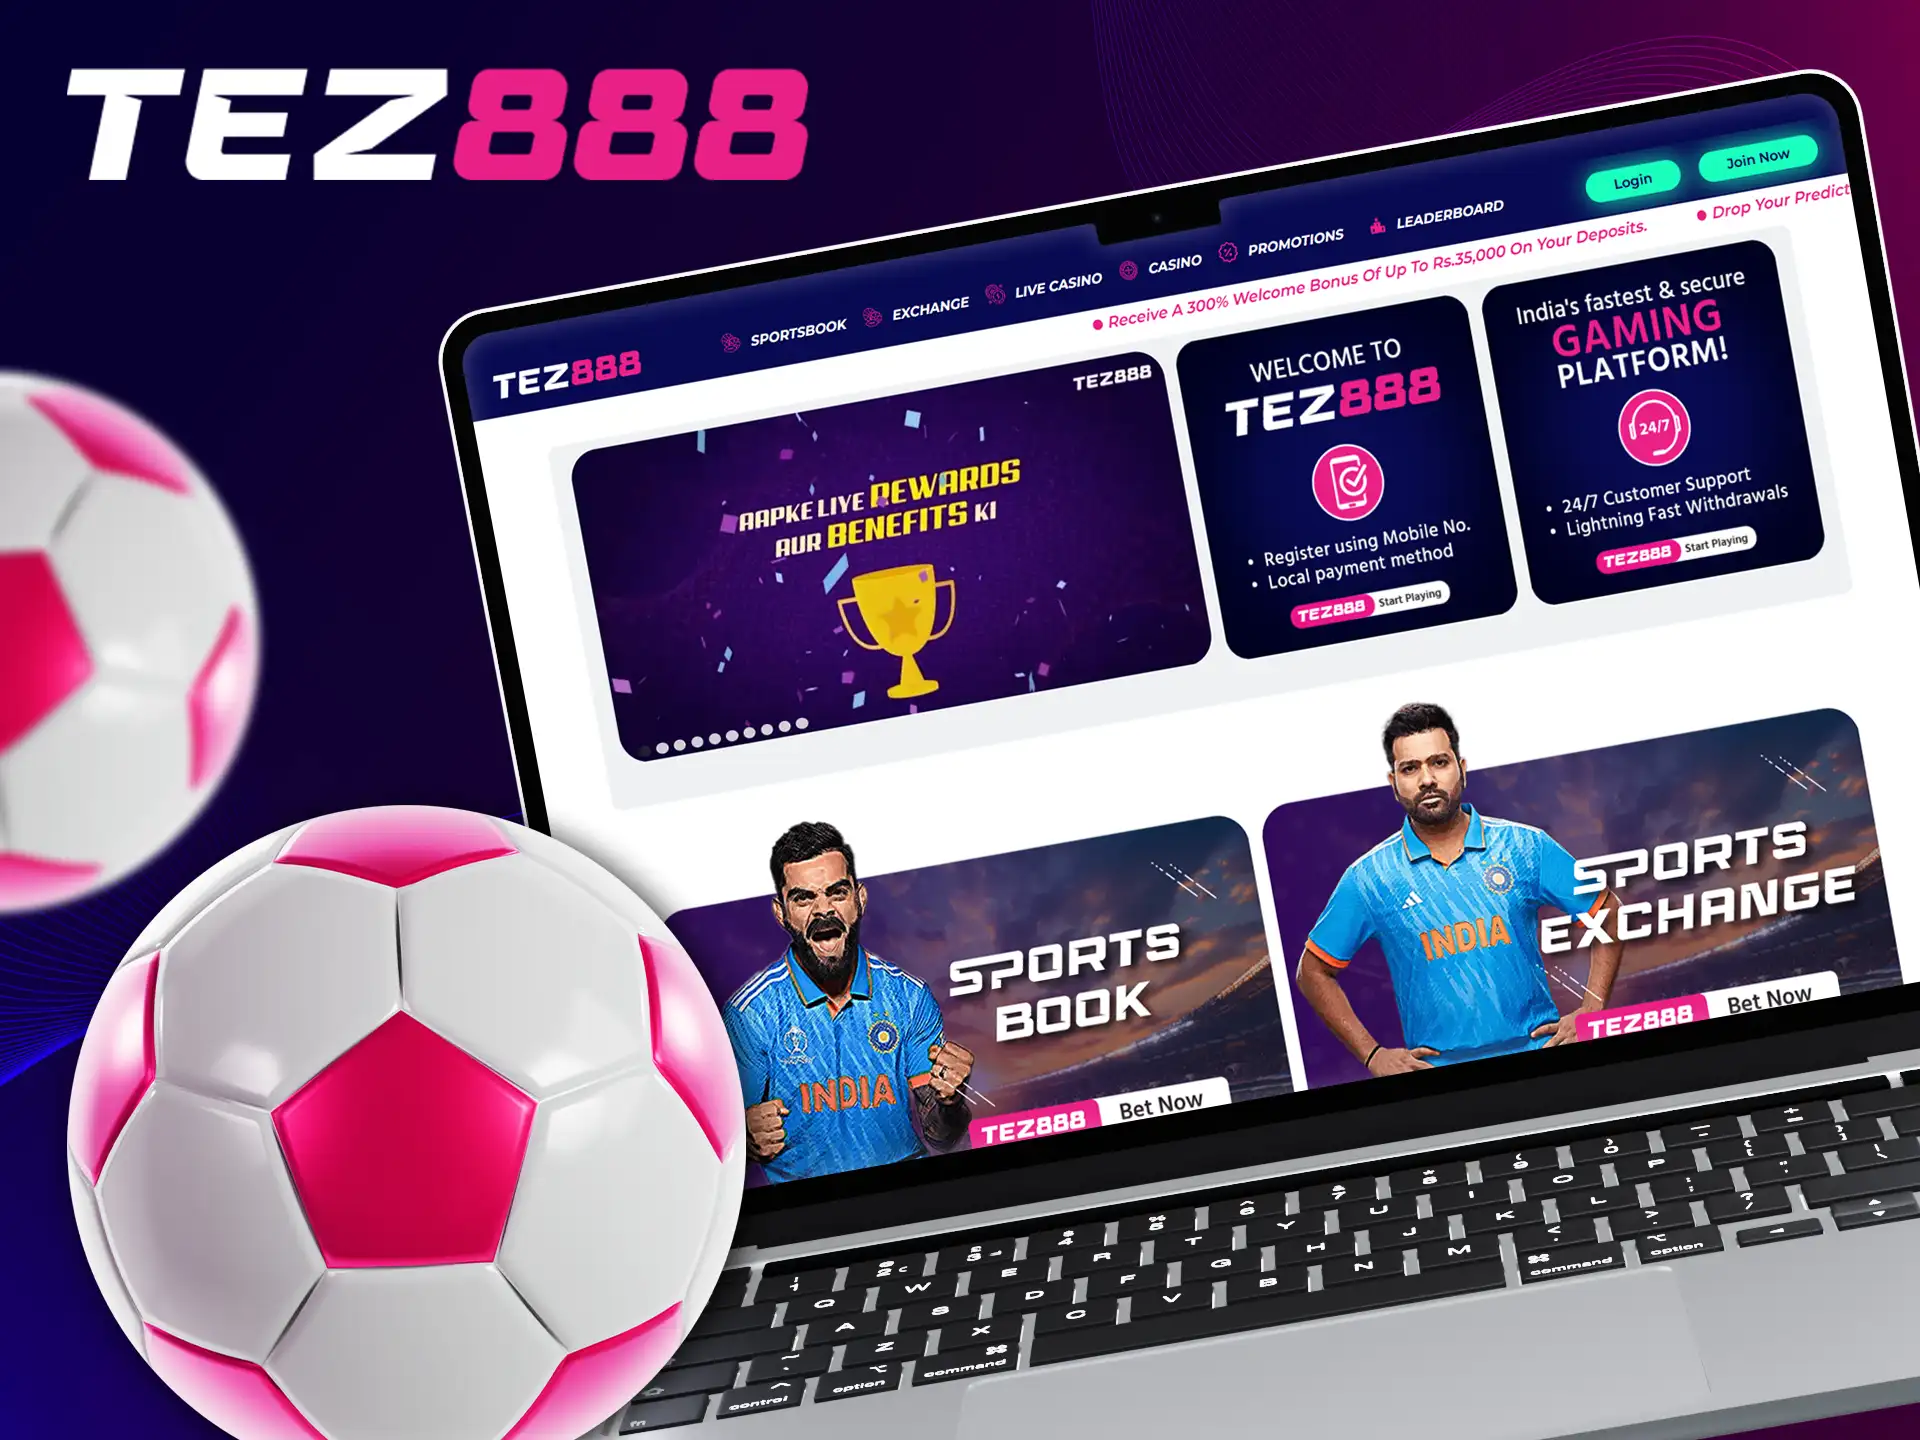 Bet on football matches at the new Tez888 casino.